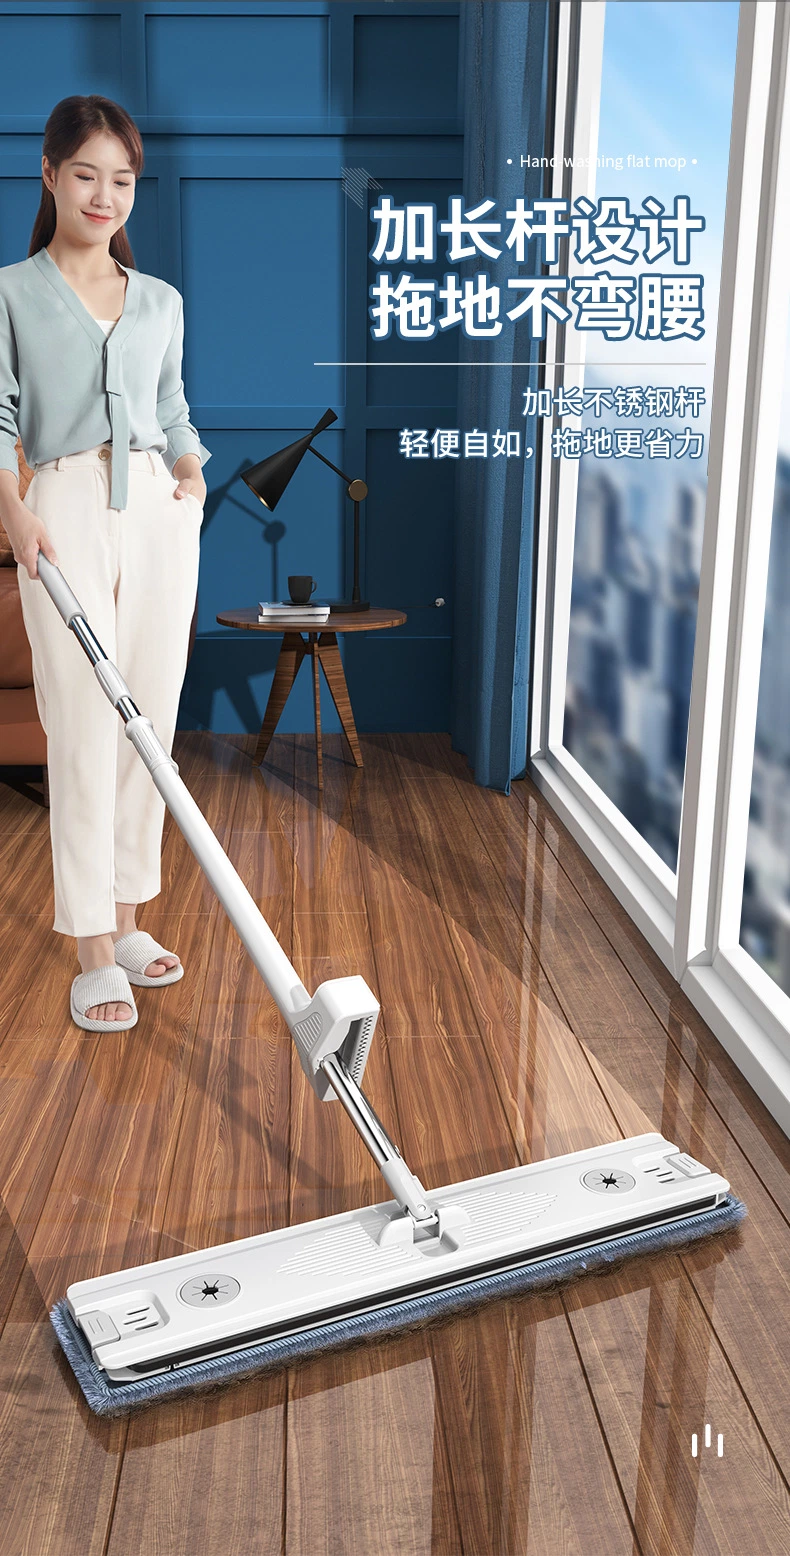 Professional Microfiber Mop for Hardwood, Laminate, Tile Floor Cleaning, with Self Wringer Set, Mop with 4 Extra Refills Wet &amp; Dry No Hand Washing Lazy Flat Mop